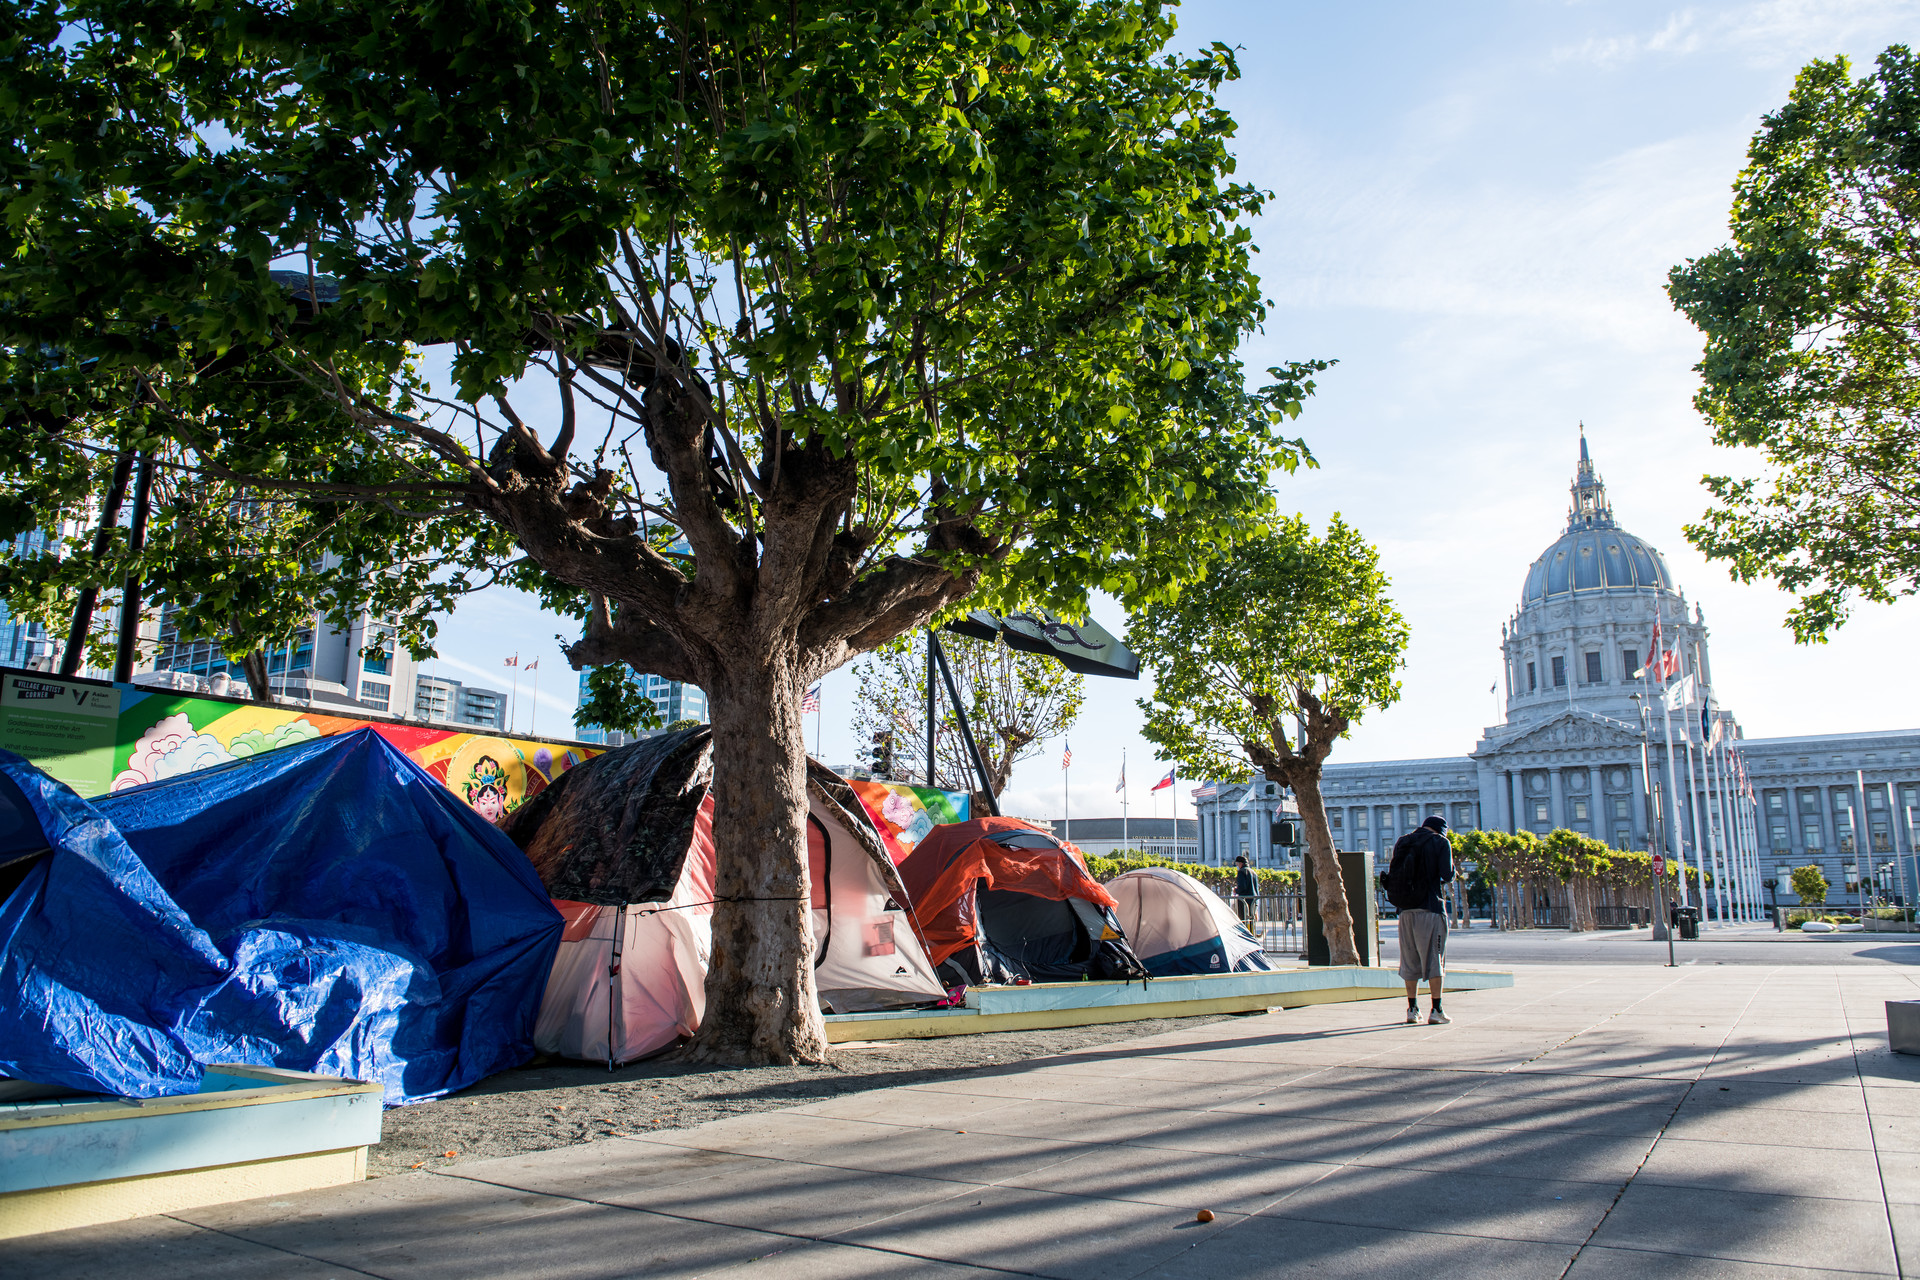 A row of tents line a sidewalk in downtown San Francisco near City Hall. The white, arched government building is seen standing tall in the background as the sun peaks over a few green trees. A blue tarp hangs over one tent.